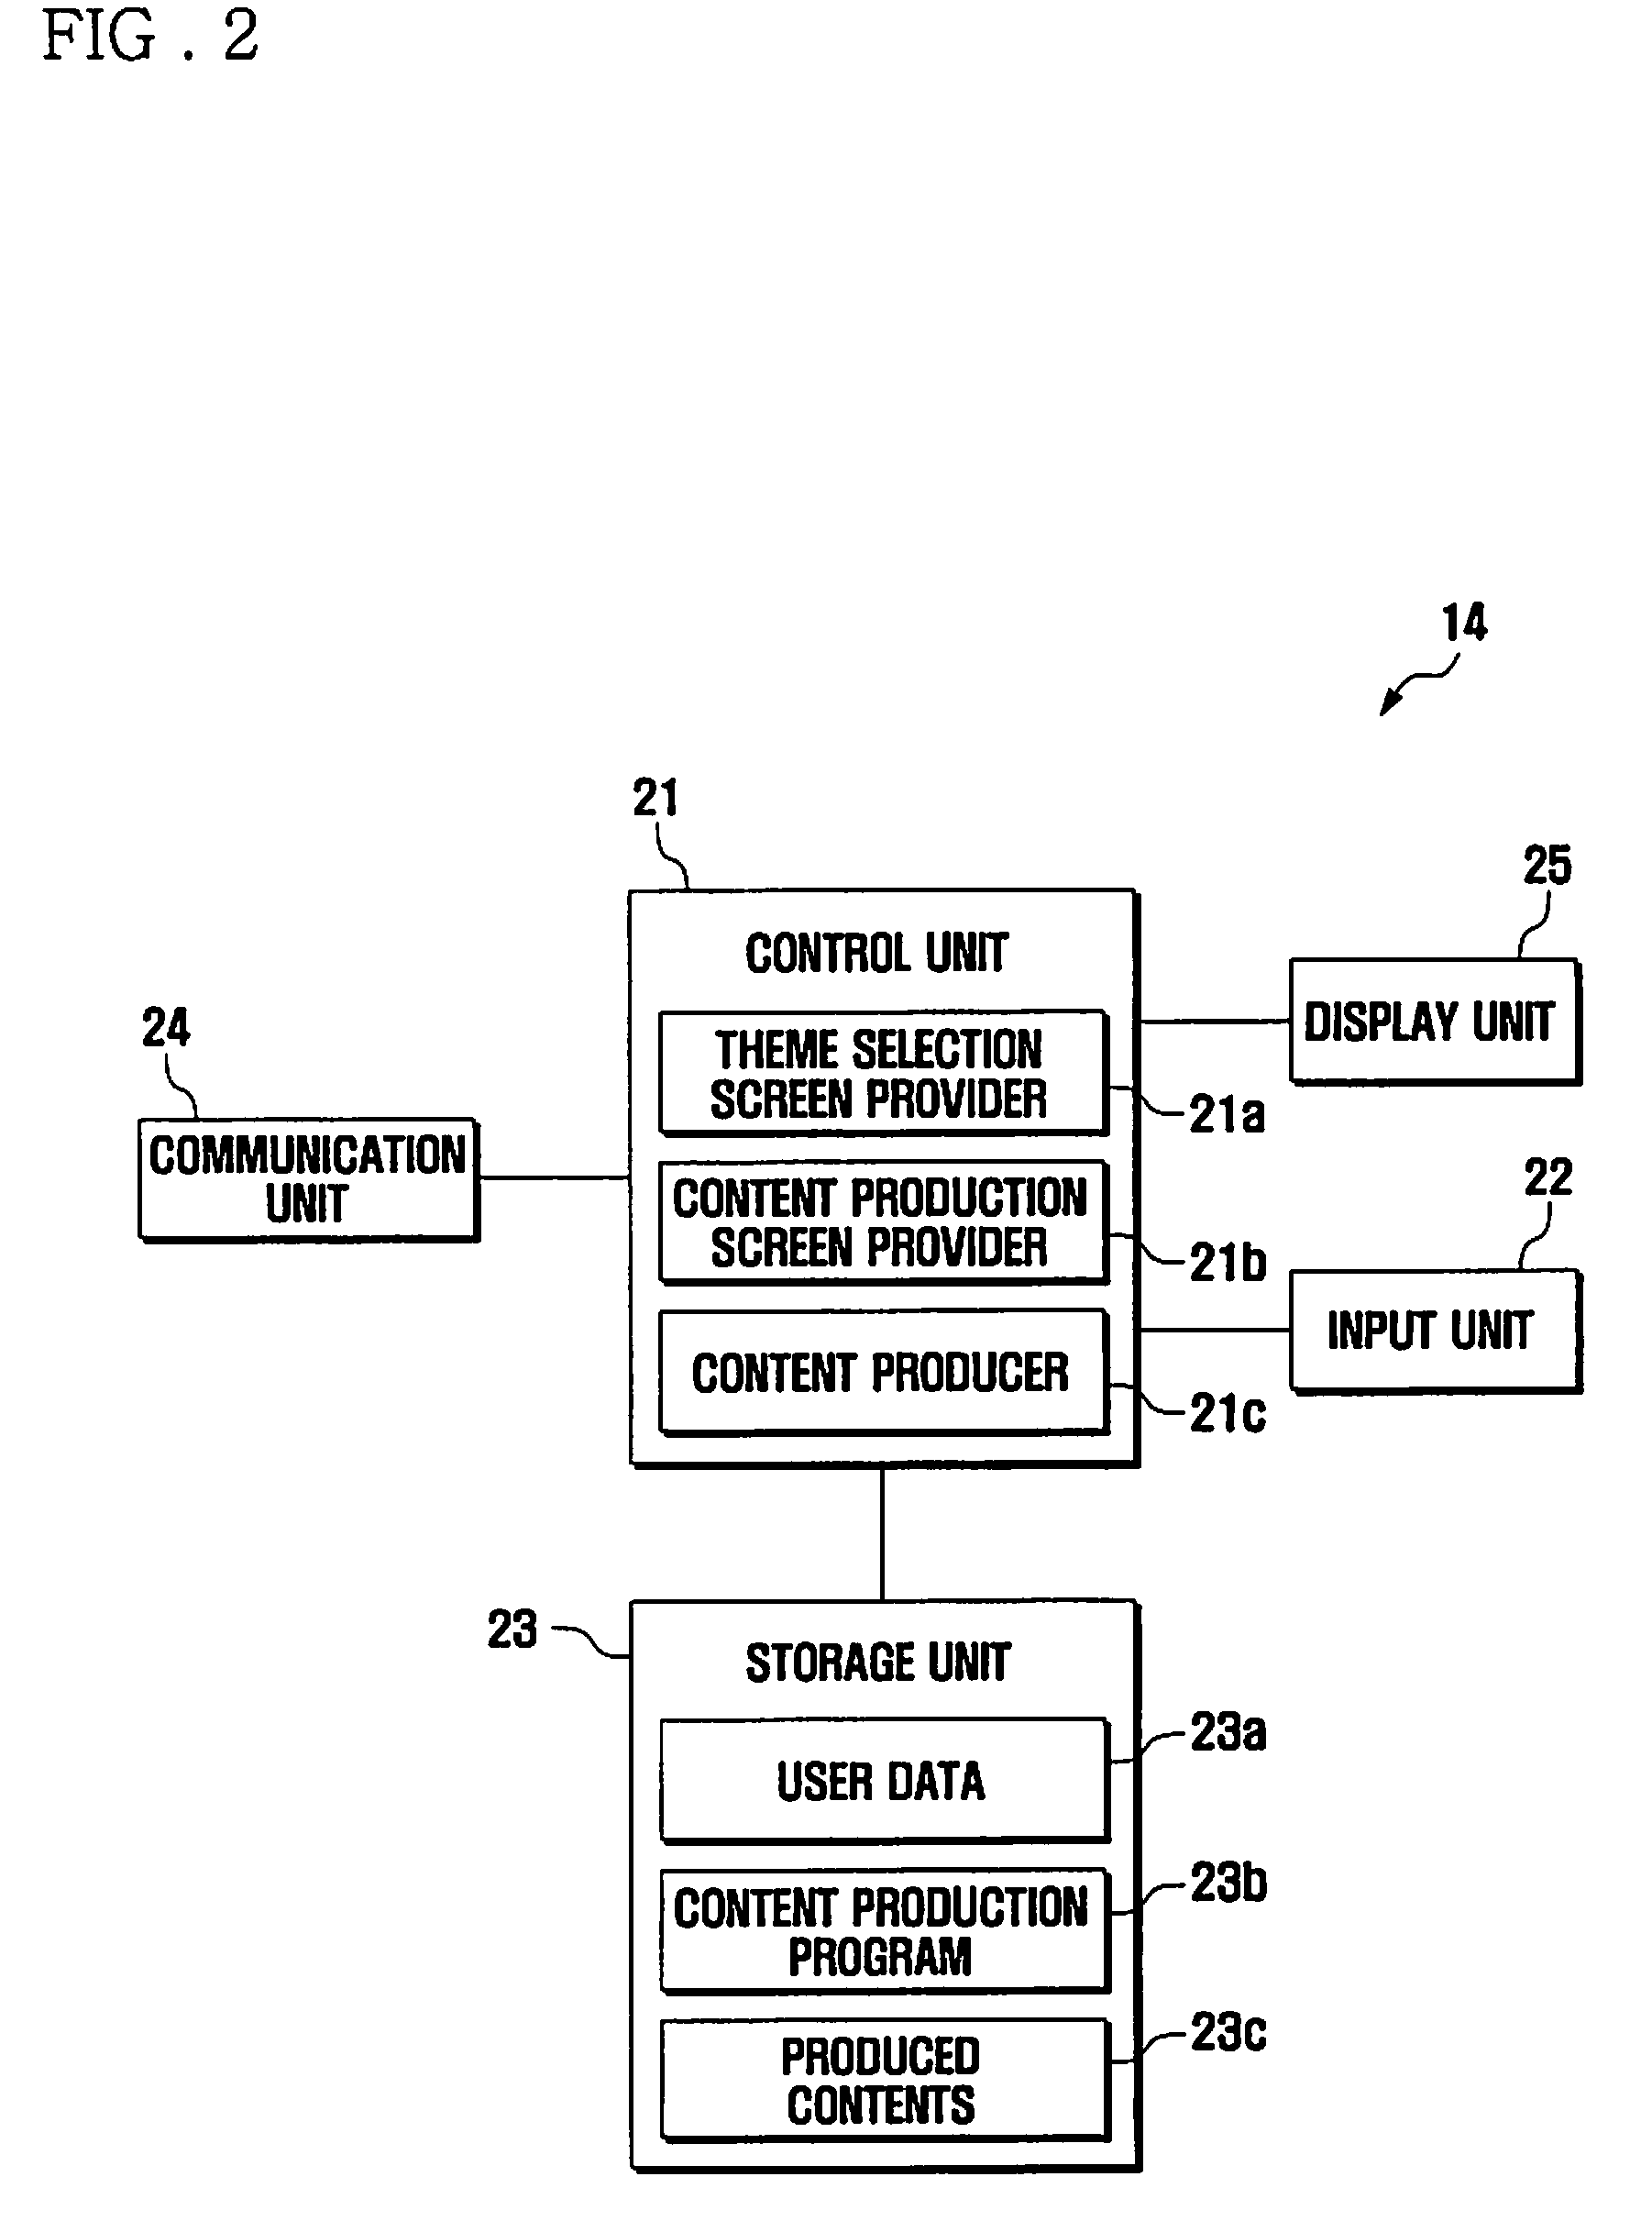 Content production apparatus and method